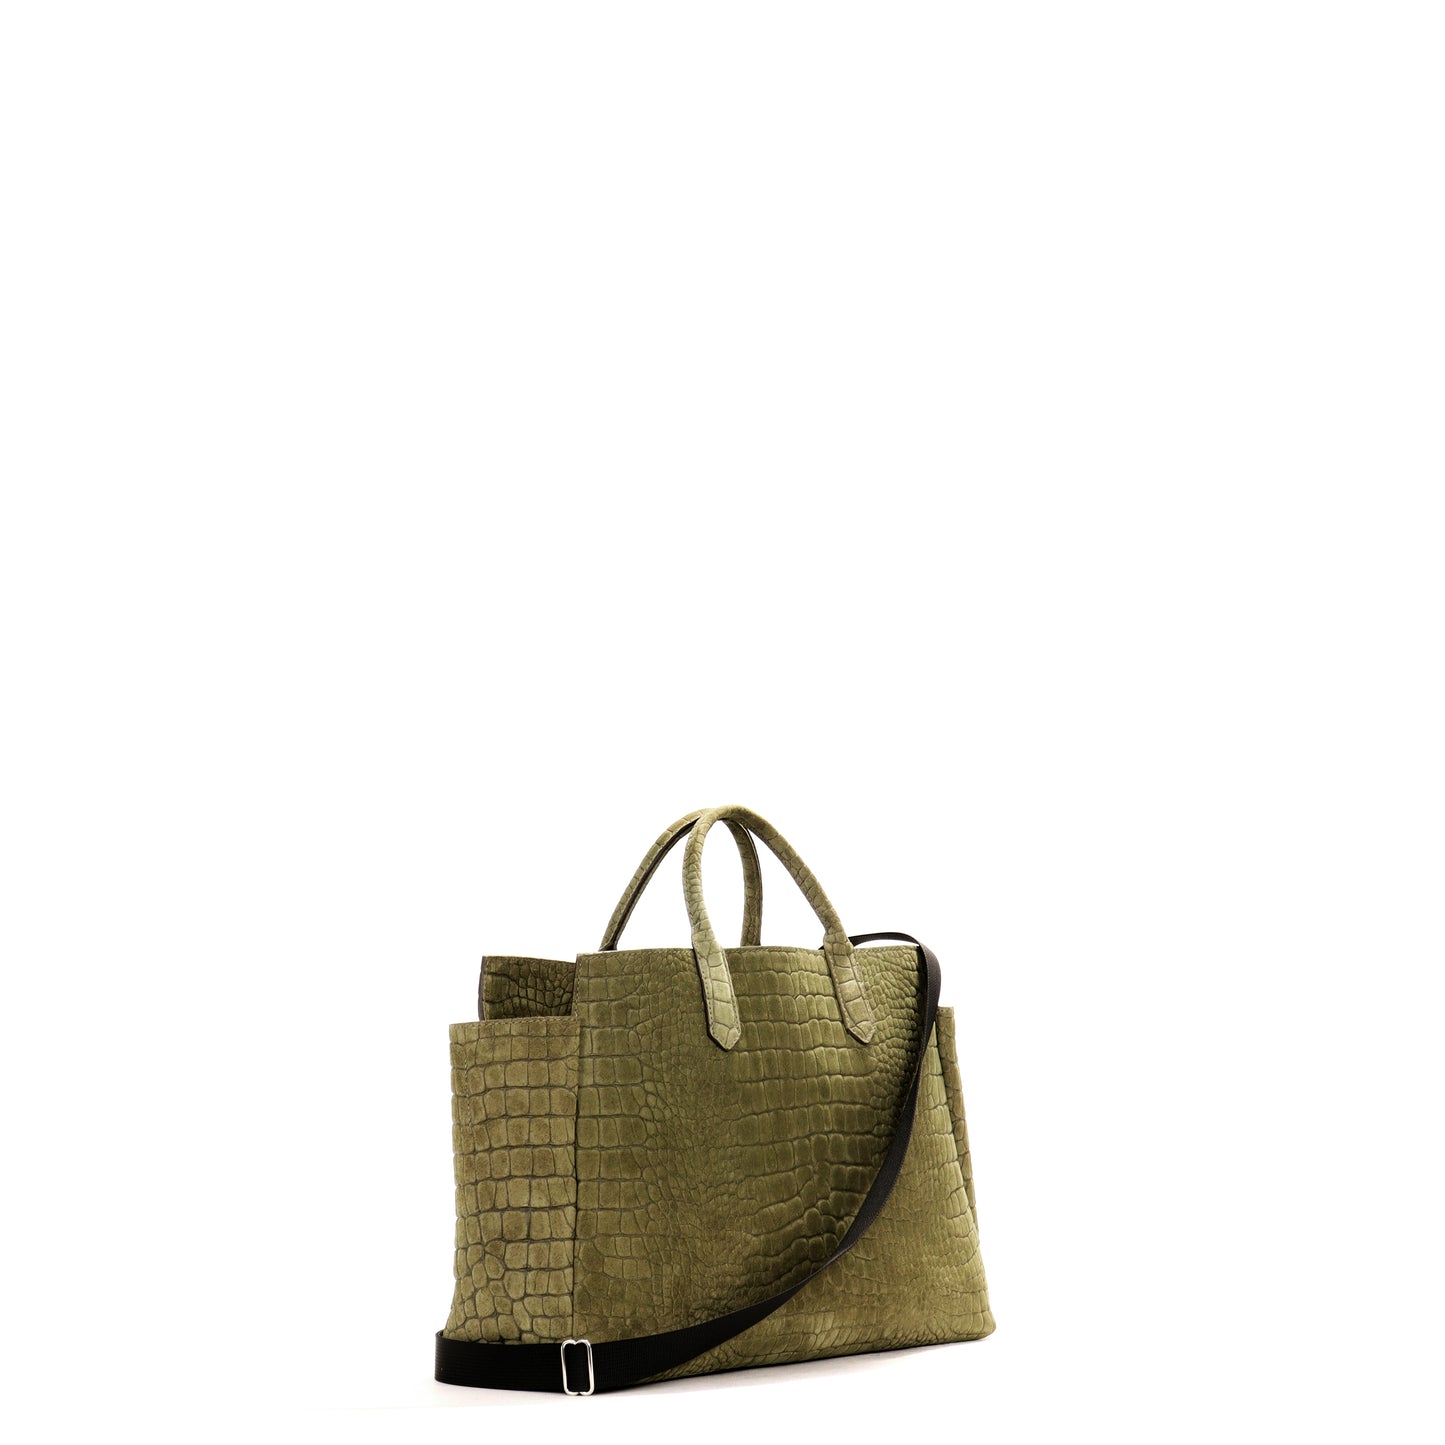 CATCHALL FIG SUEDED EMBOSSED CROC